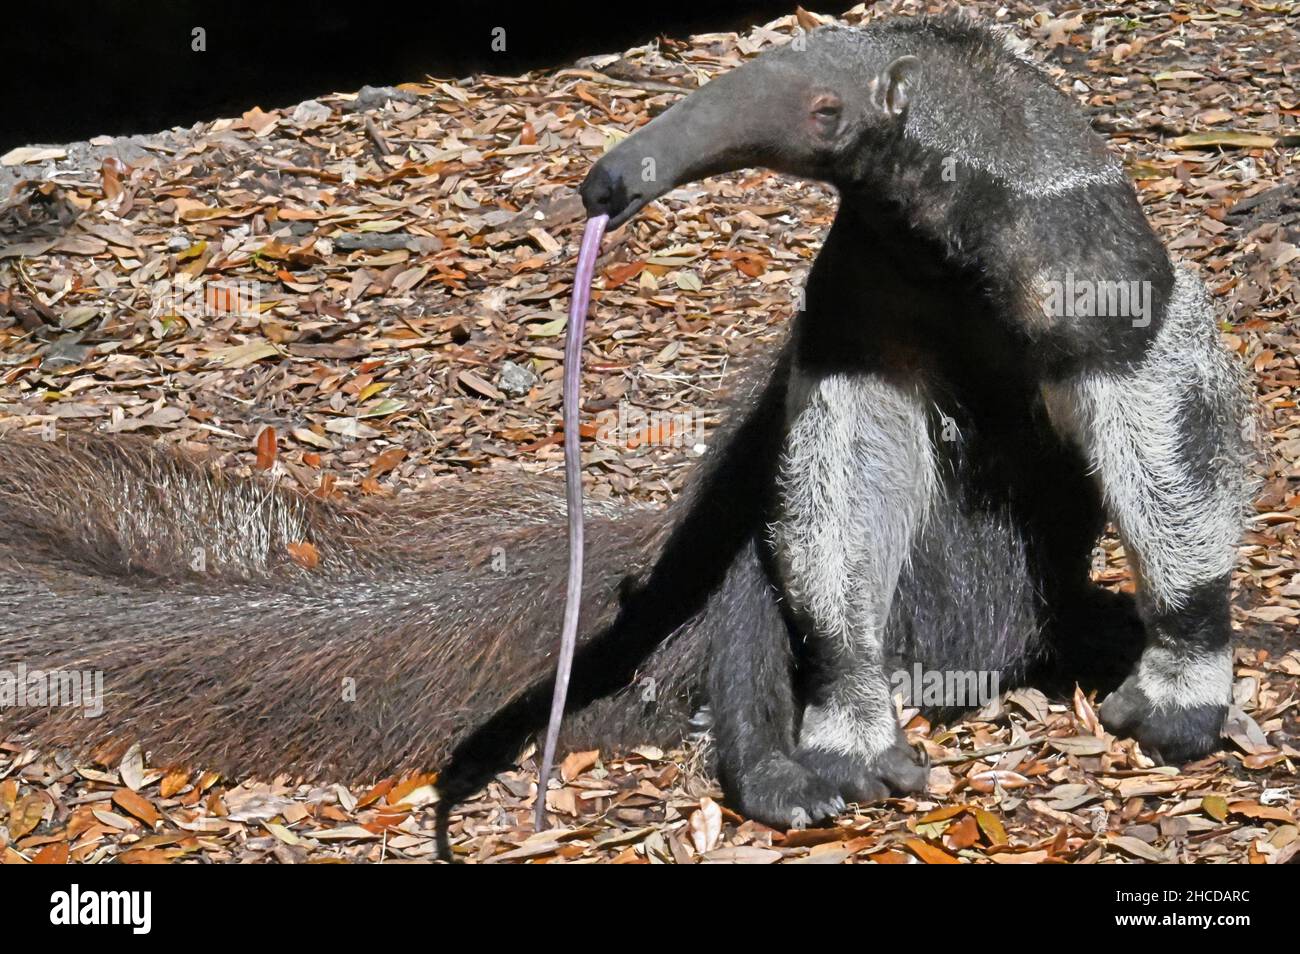 Giant Anteater Standing, Tongue to the Ground Stock Photo